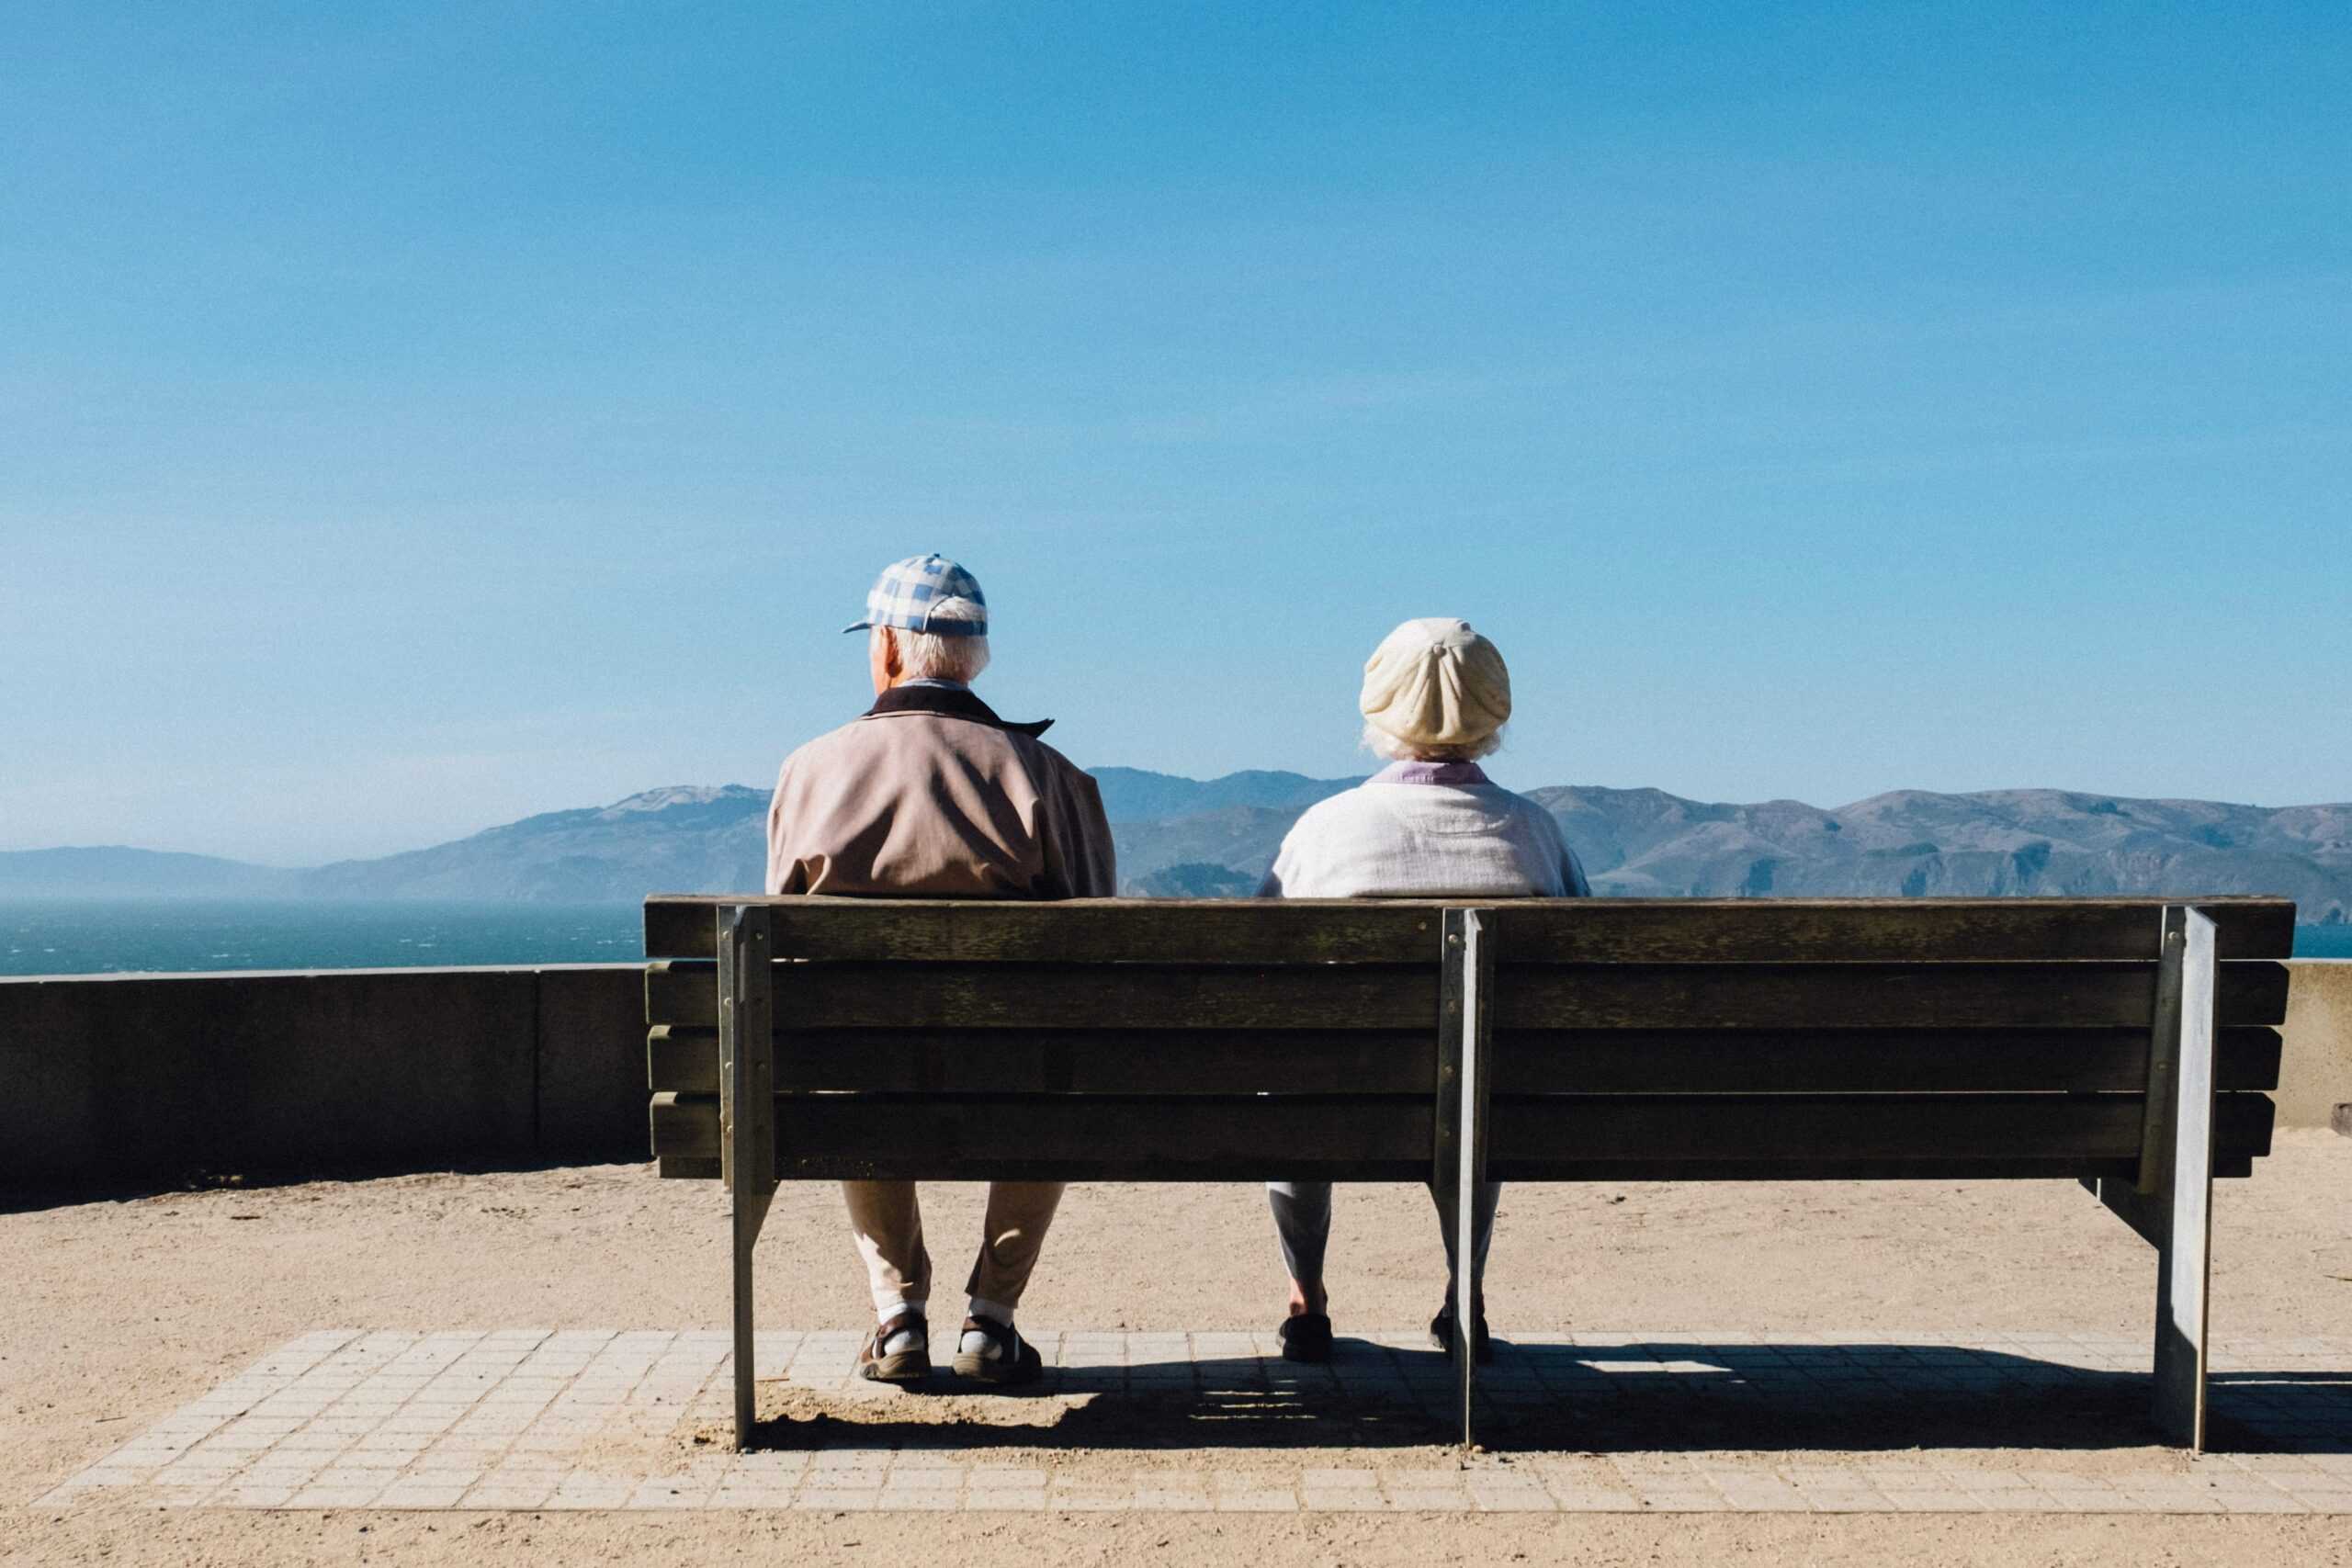 Two seniors sitting on a bench